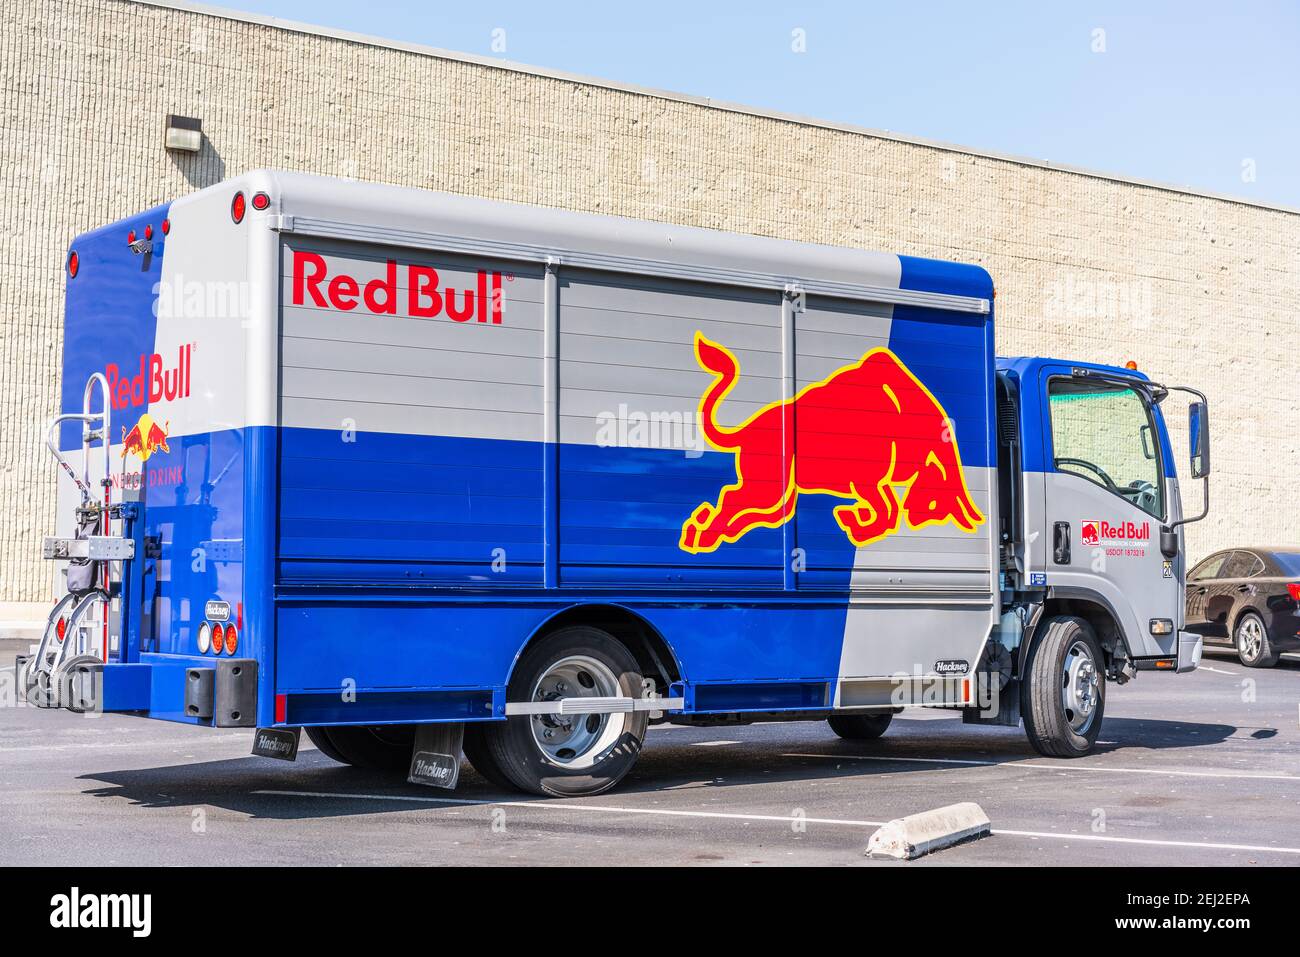 Oct 5, 2020 Sunnyvale / CA / USA - Red Bull truck making deliveries in South San Francisco Bay Area; Stock Photo